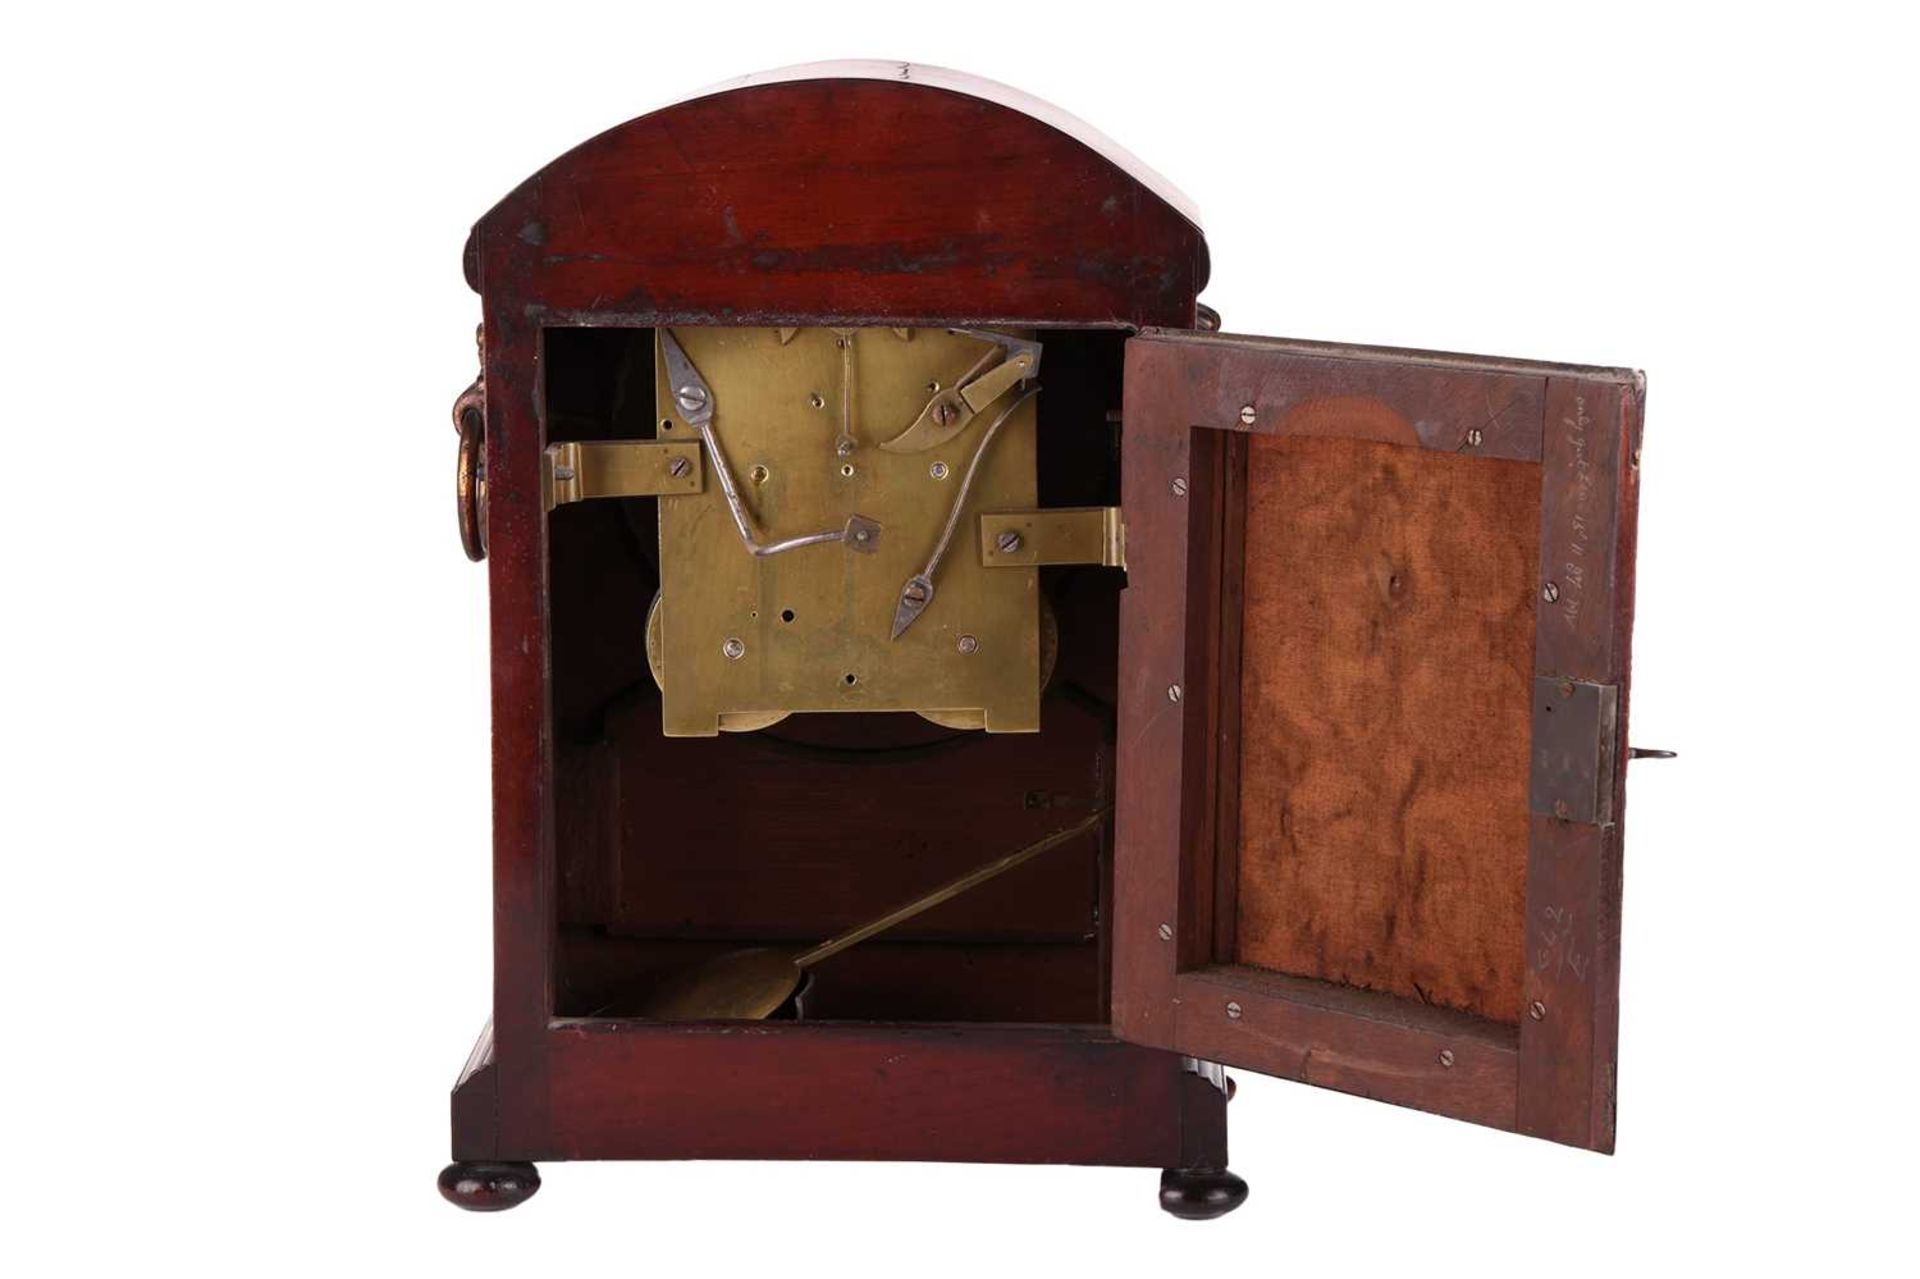 Moore of London a Regency mahogany 8-day twin fusee mantel clock case, with an arched top case and p - Image 3 of 7